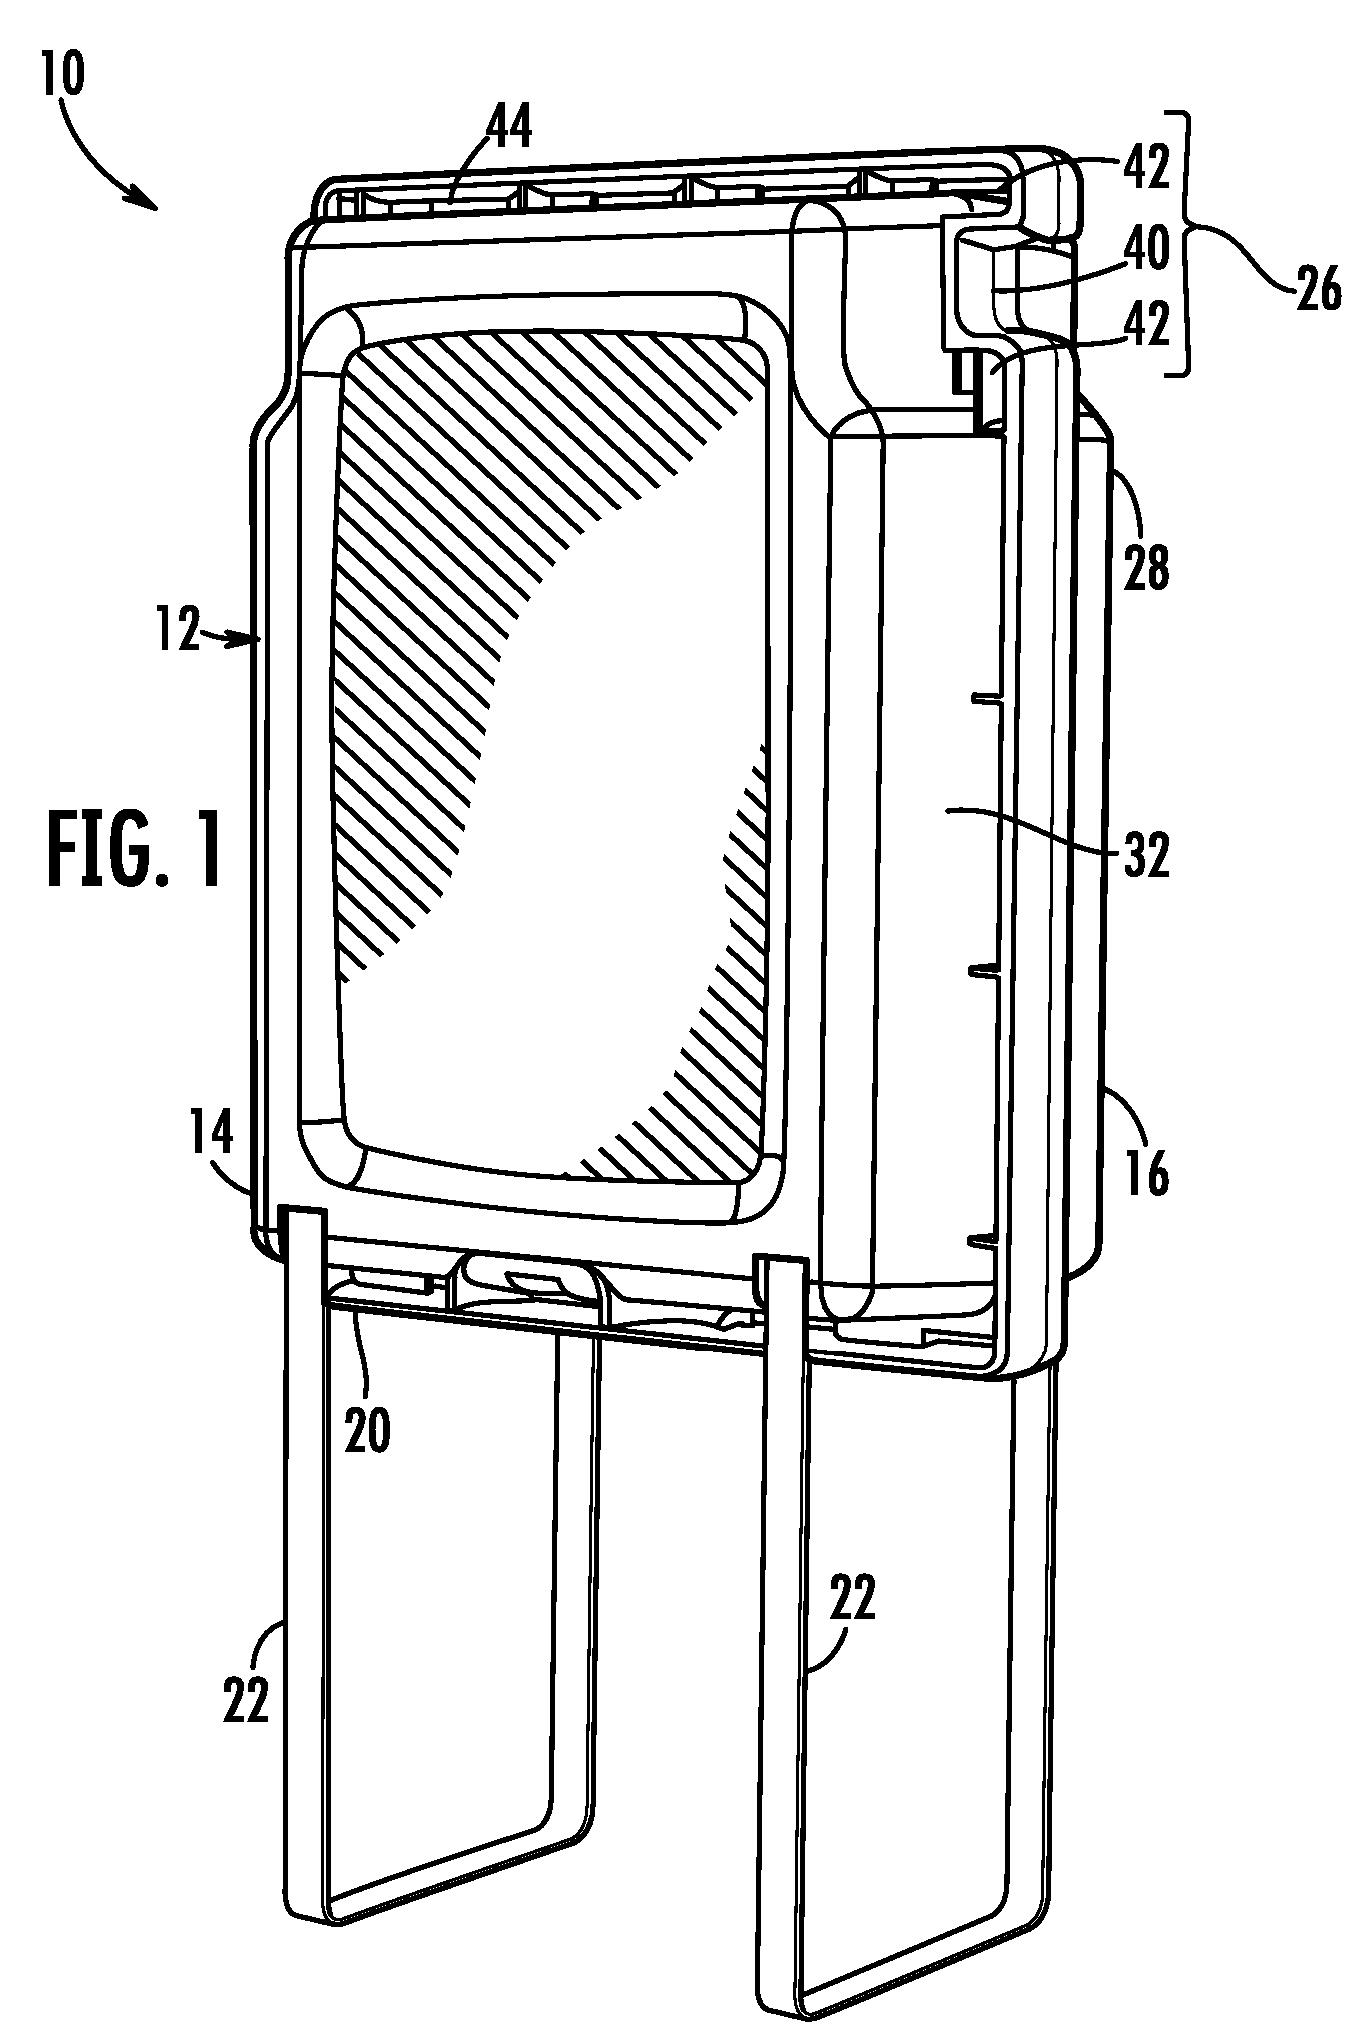 Cartridge assembly for a self-contained emergency eyewash station